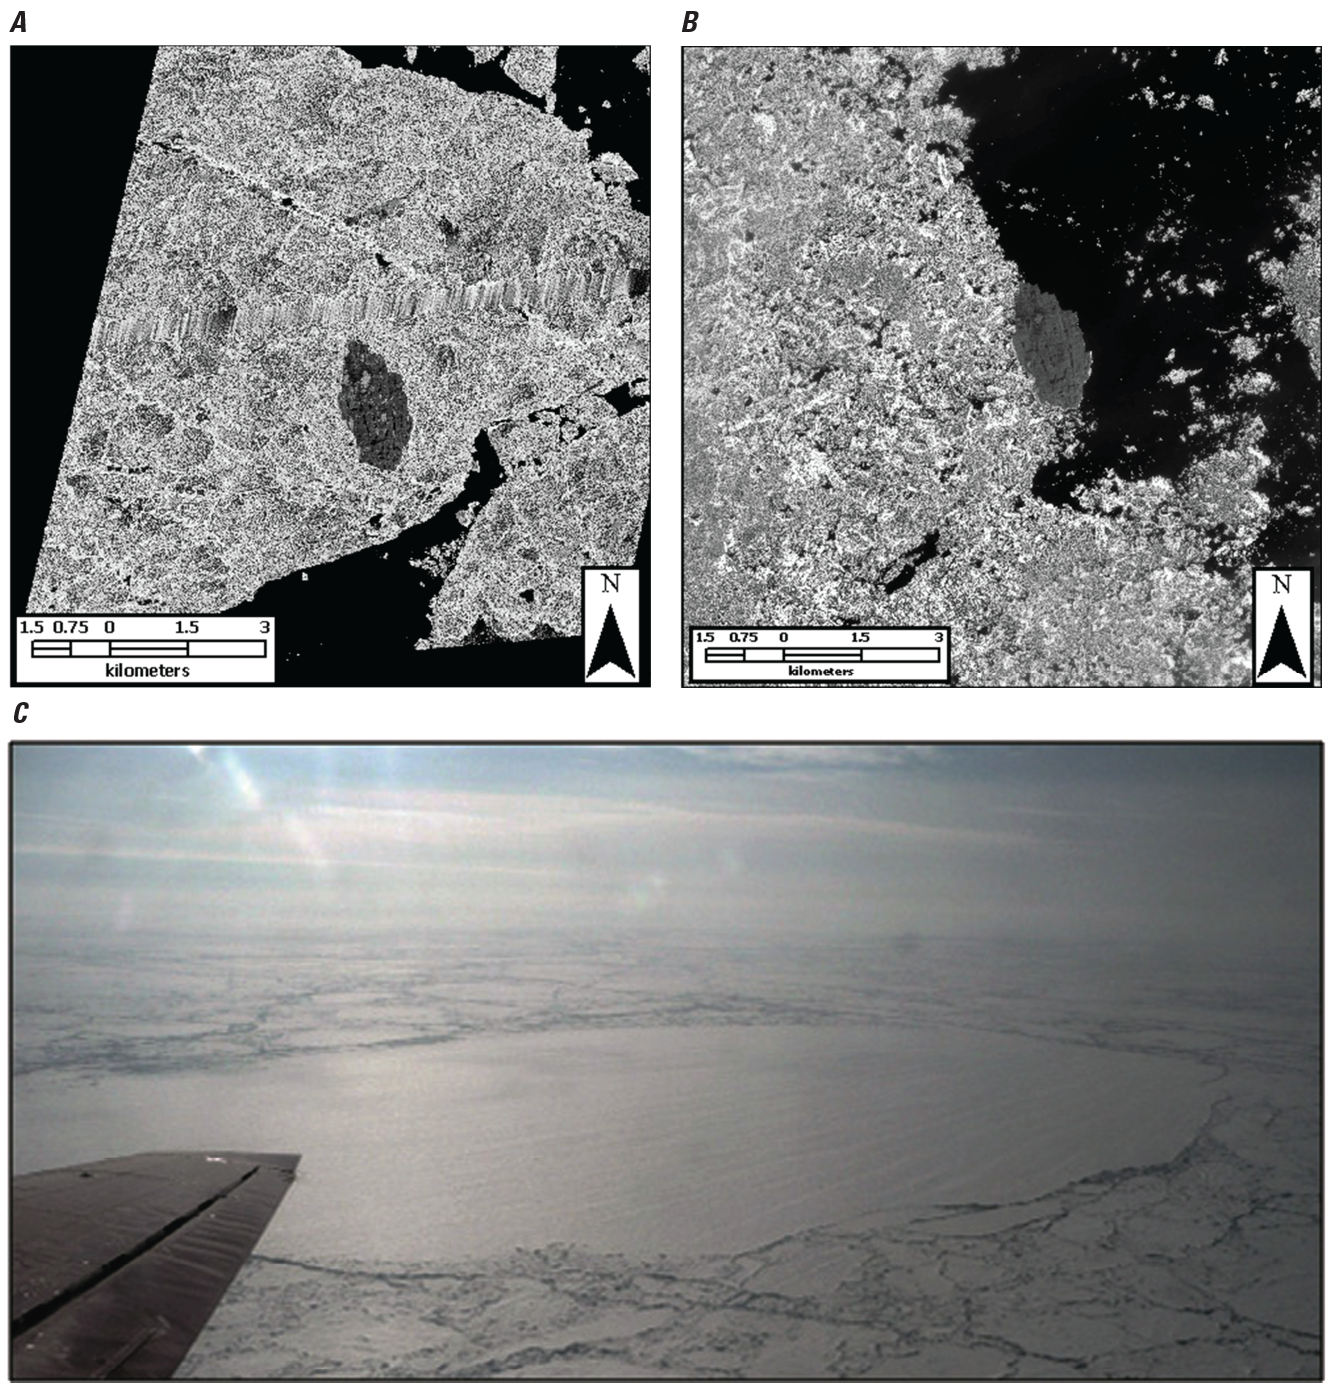 In 2 LIDPs, an ice island appears as a dark-gray oval; a colored air photo shows light
                           shining on the smooth surface of the same ice island.